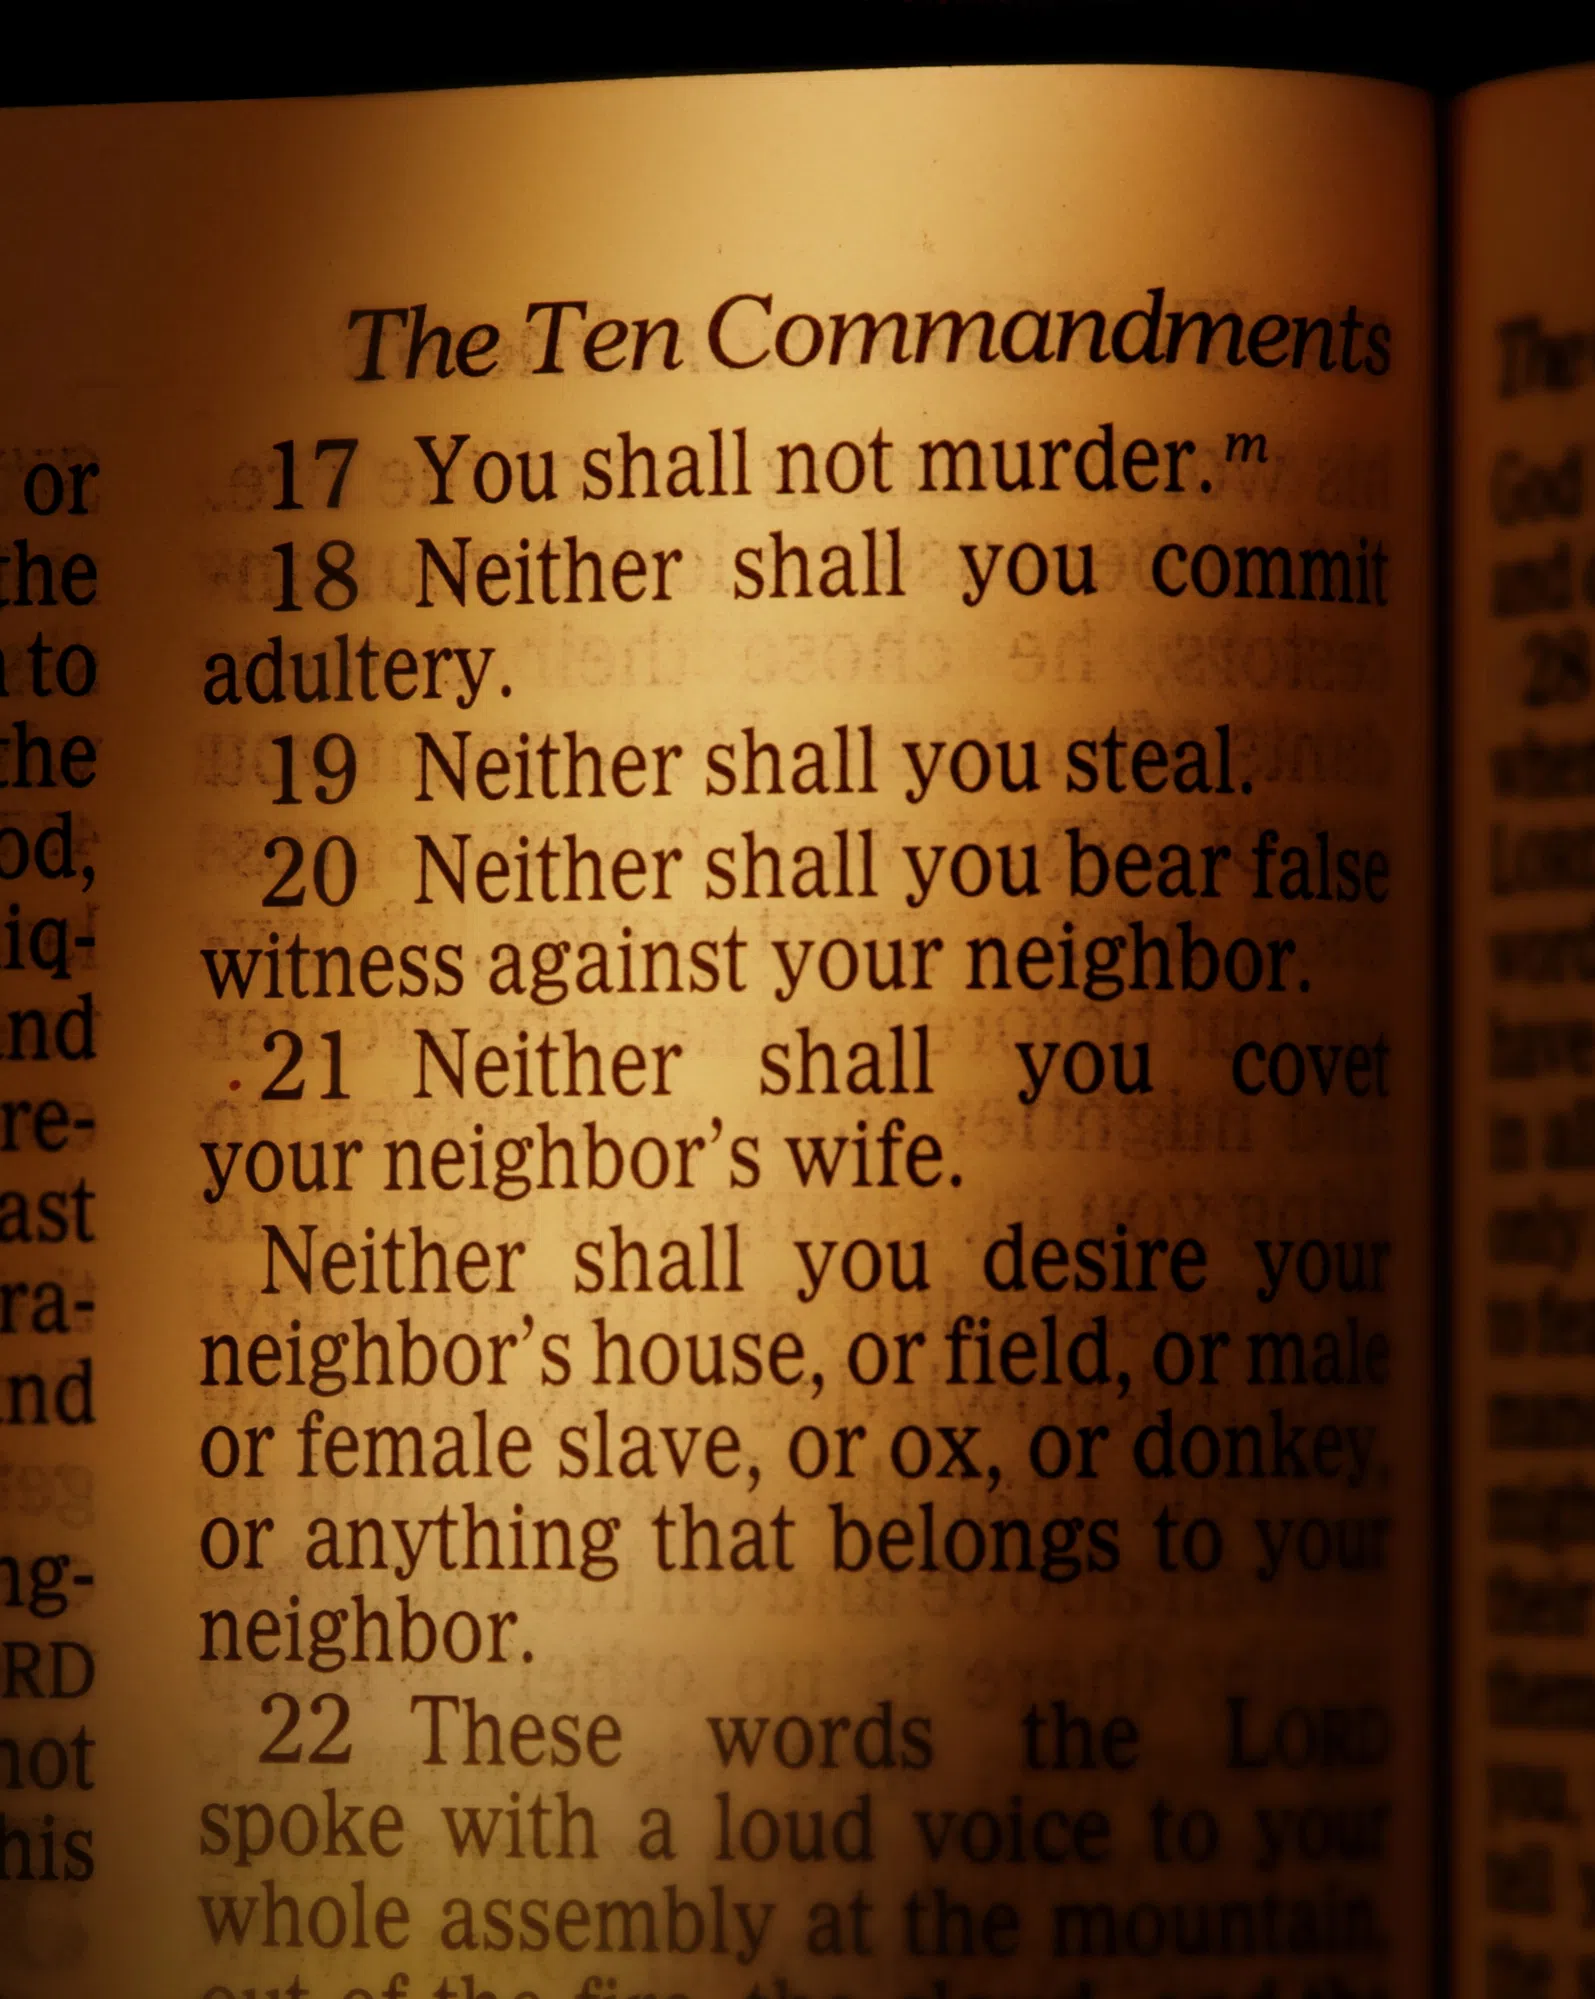 House Education Committee passes bill that would allow the Ten Commandments to be displayed in public classrooms